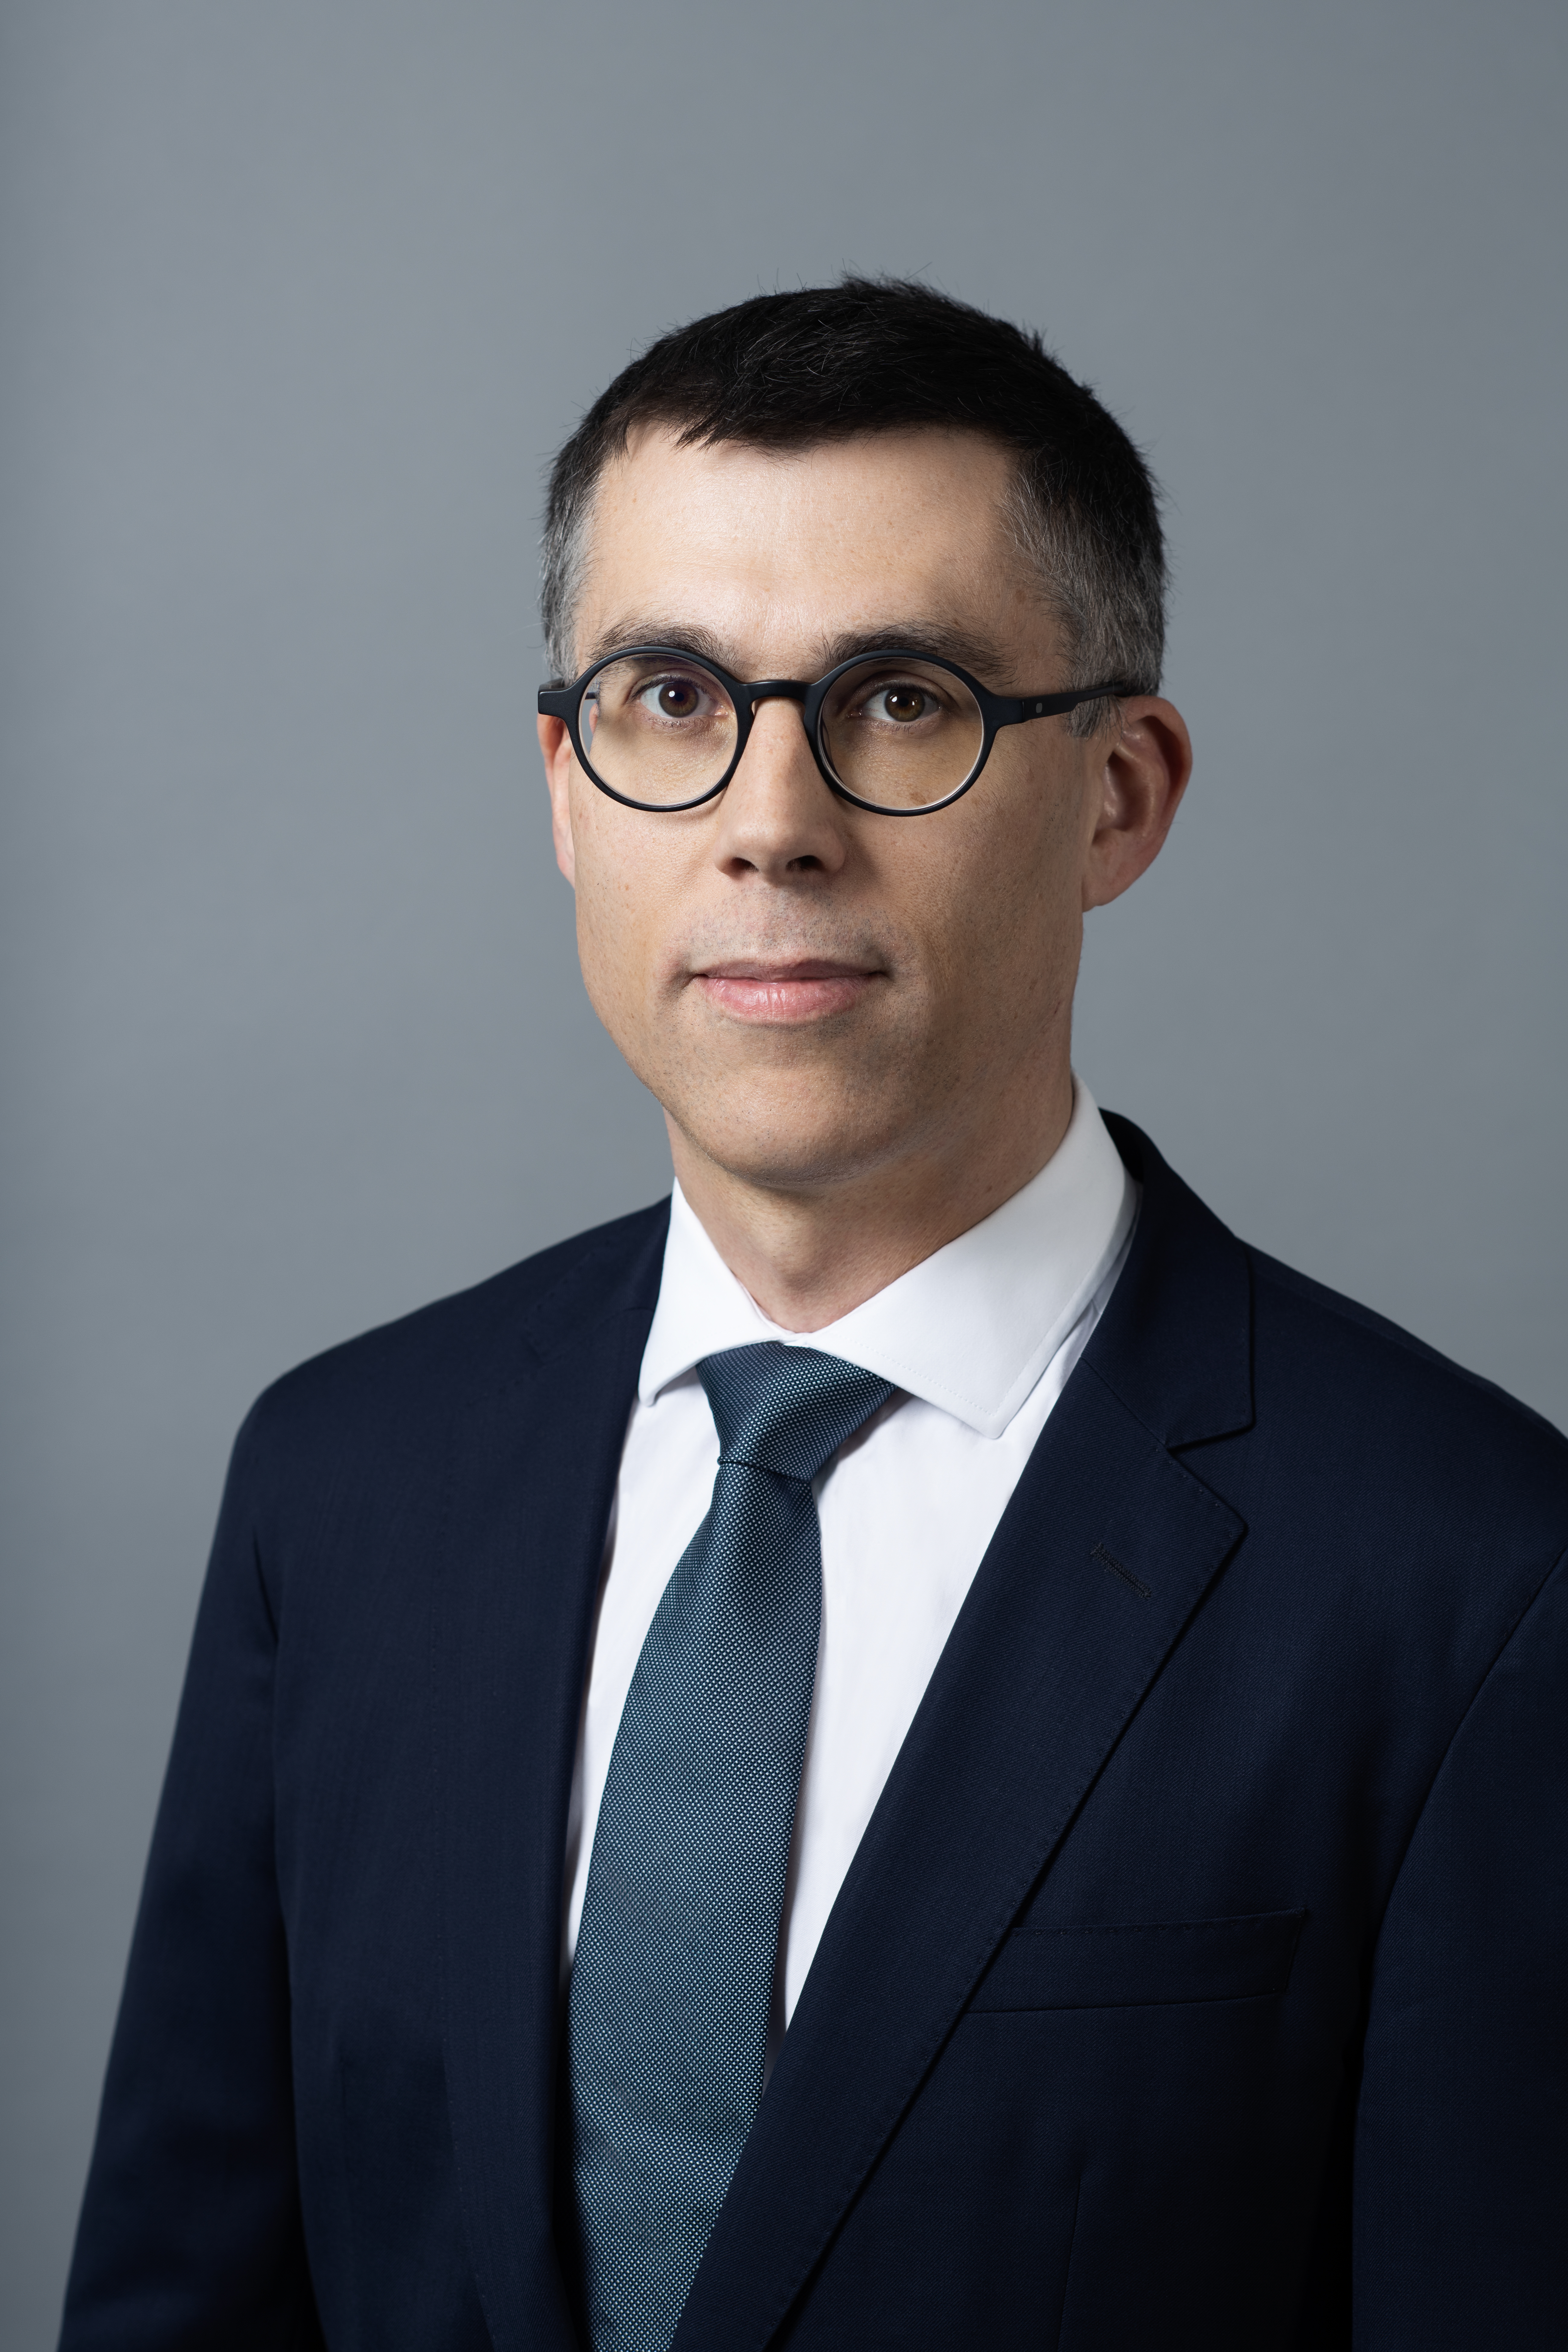 Appointment of Jean-Baptiste Choimet to the position of Chief Executive Officer of GTT, as part of the implementation of its new governance